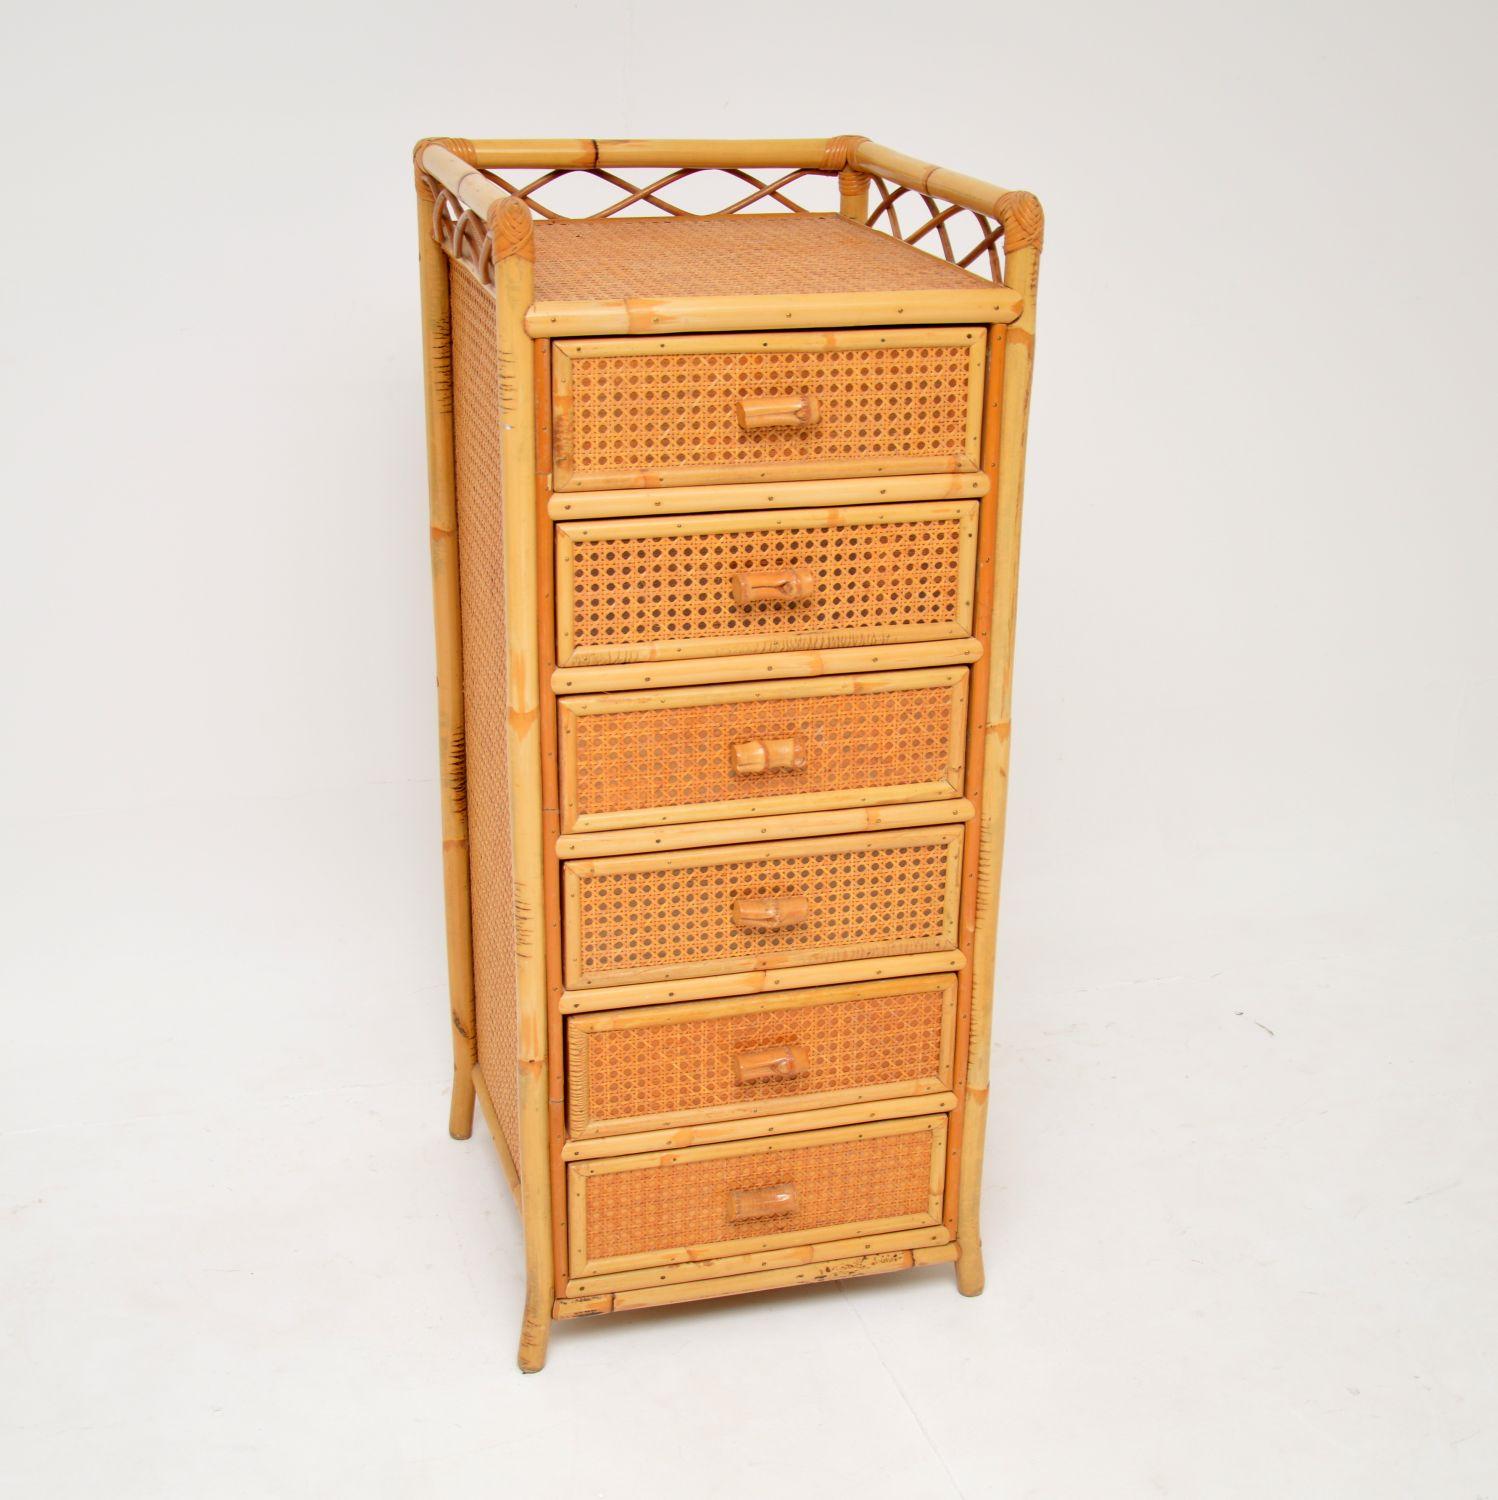 A stylish and useful vintage bamboo and rattan tallboy chest of drawers by Angraves. This was made in England it dates from around the 1970’s.

It is really well made and of super quality. This is a very useful size, tall and slim with lots of